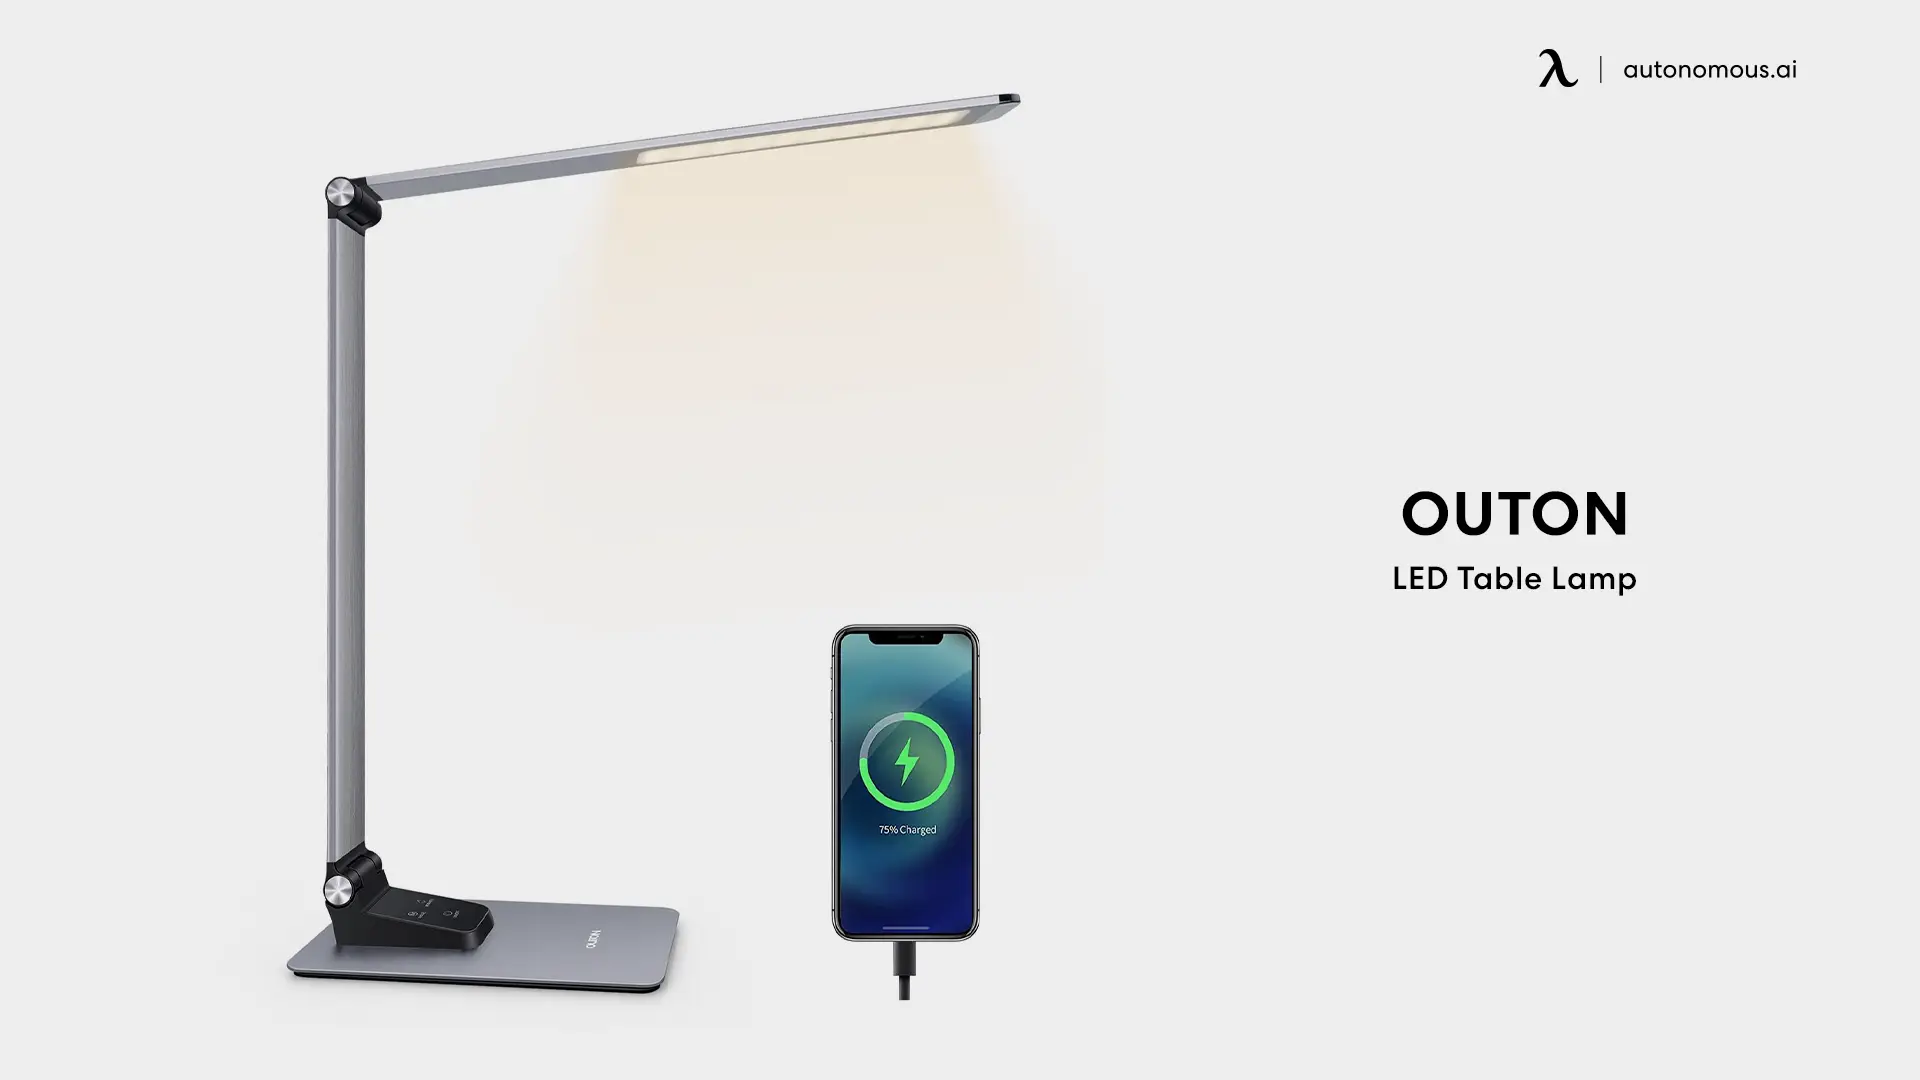 Outon LED Table Lamp - desk lamp with a wireless charger